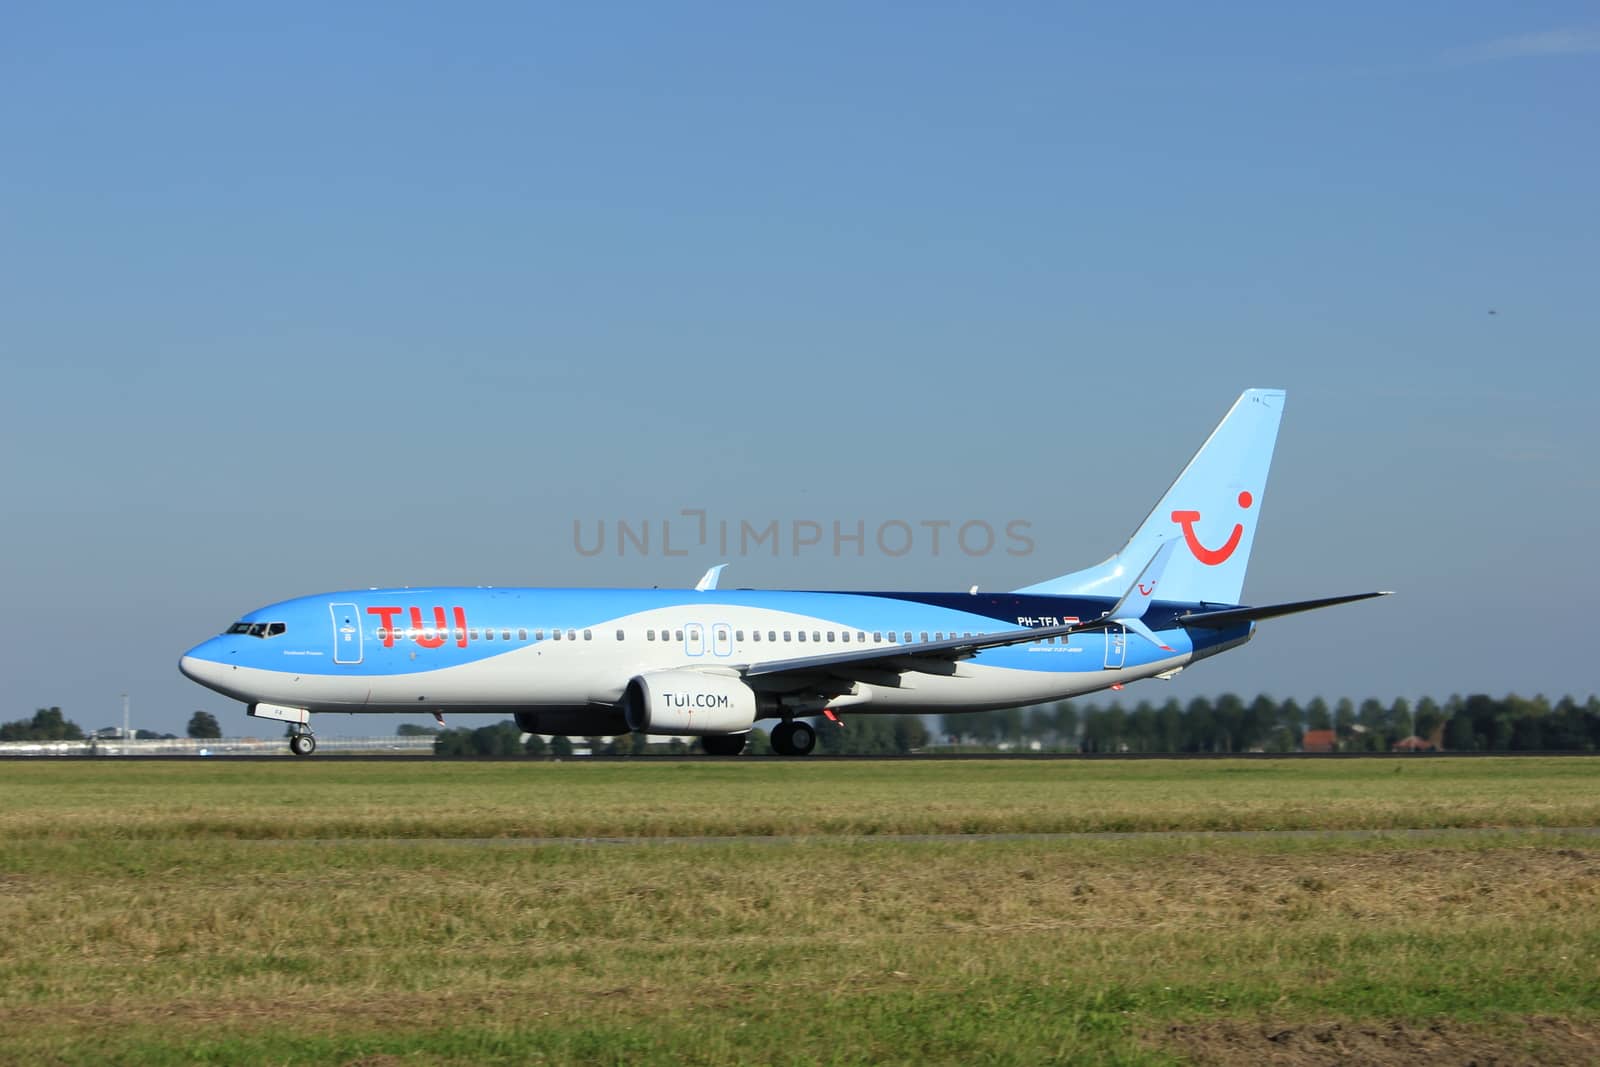 Amsterdam, the Netherlands  - August, 18th 2016: PH-TFA  TUI Airlines Netherlands Boeing 737-86N
taking off from Polderbaan Runway Amsterdam Airport Schiphol